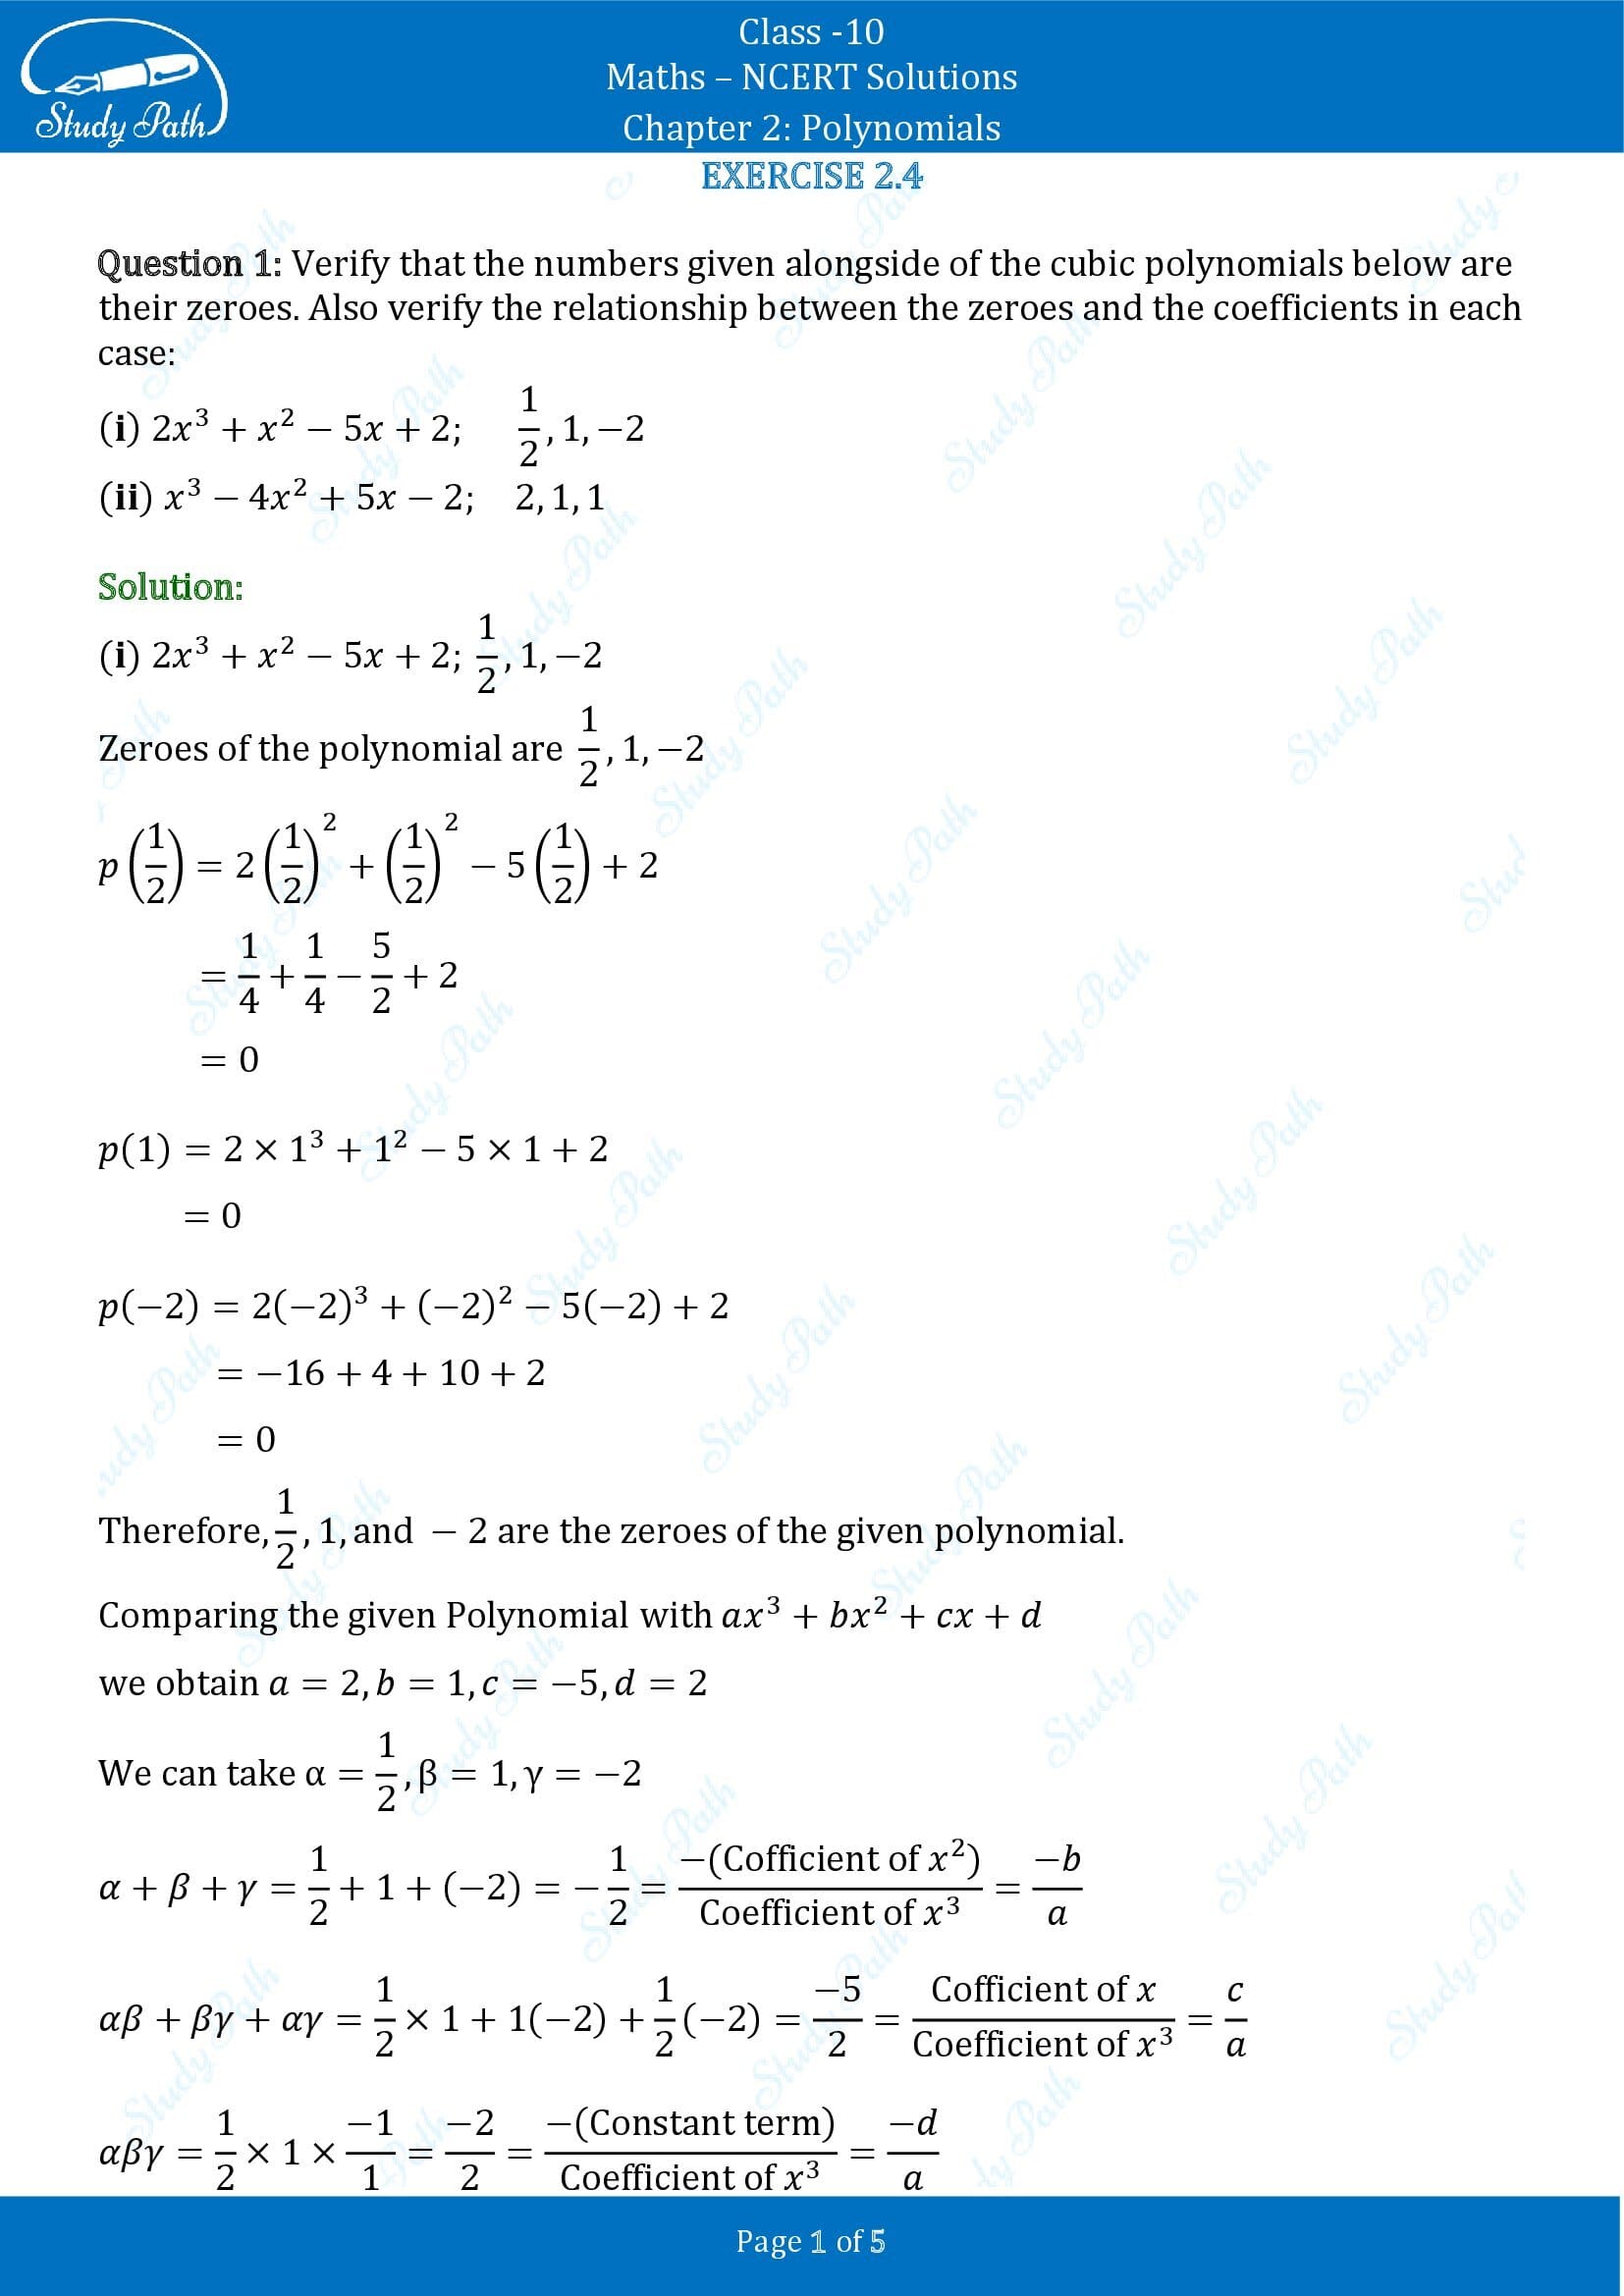 NCERT Solutions for Class 10 Maths Chapter 2 Polynomials Exercise 2.4 00001